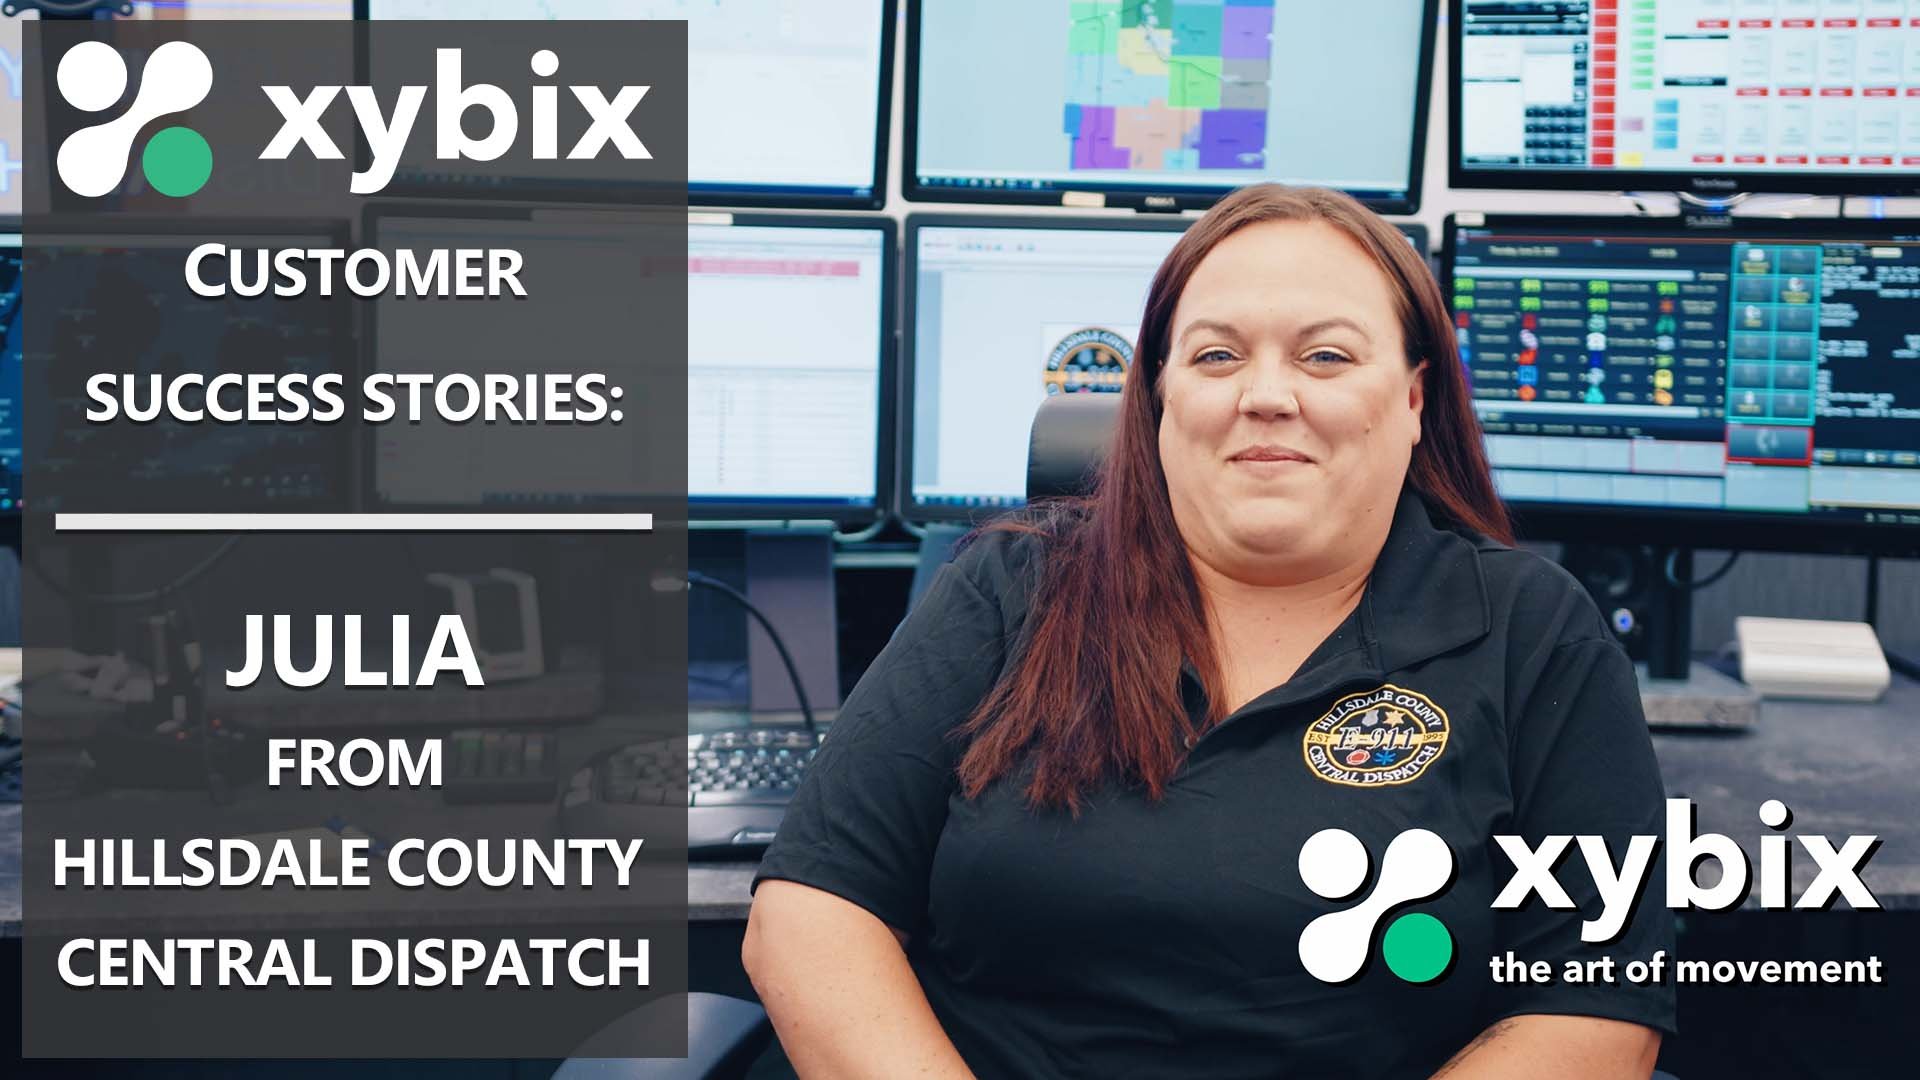 Xybix Testimonials - Julia from Hillsdale County Central Dispatch in Michigan